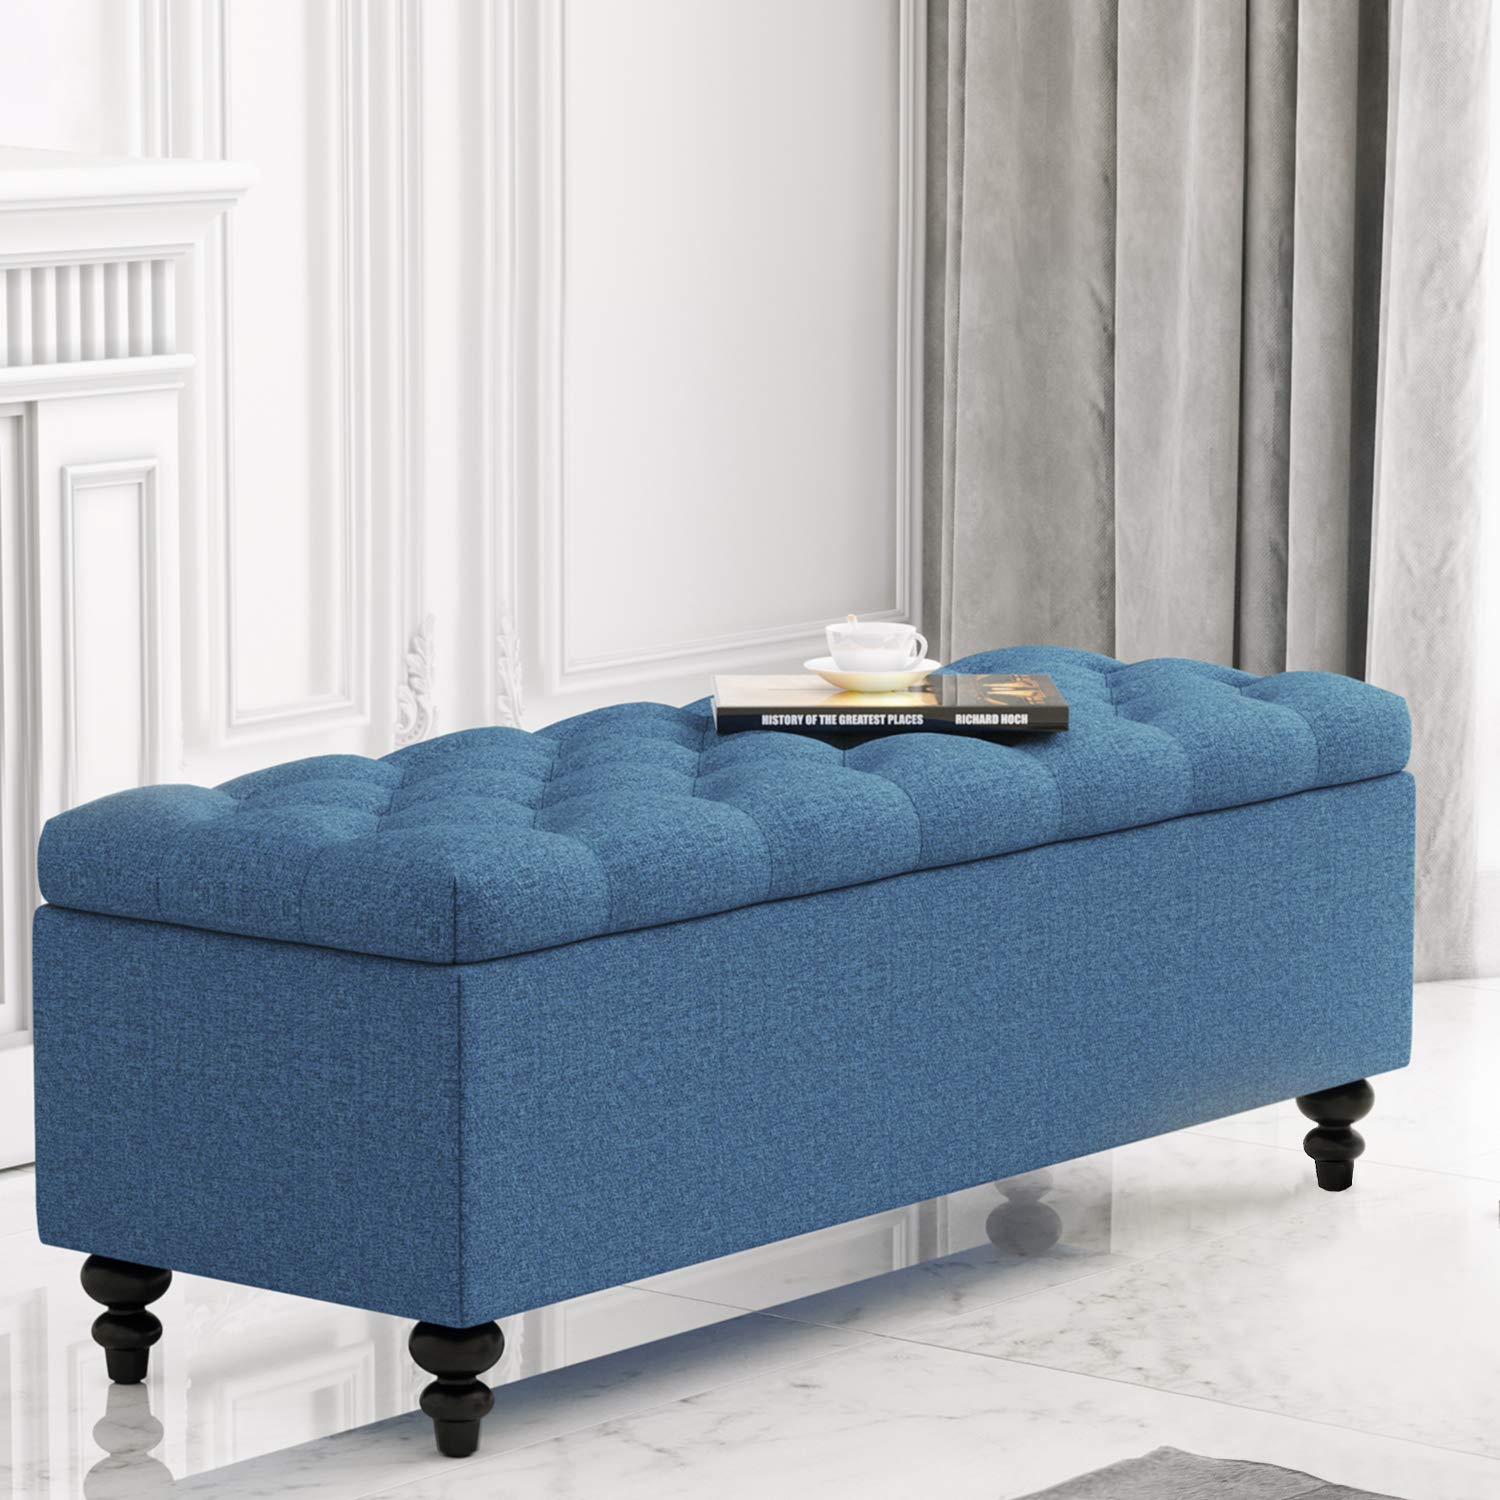 HUIMO Ottoman with Storage, 51-inch Storage Ottoman Bench with Button-Tufted, End of Bed Bench with Safety Hinge Ottoman in Upho